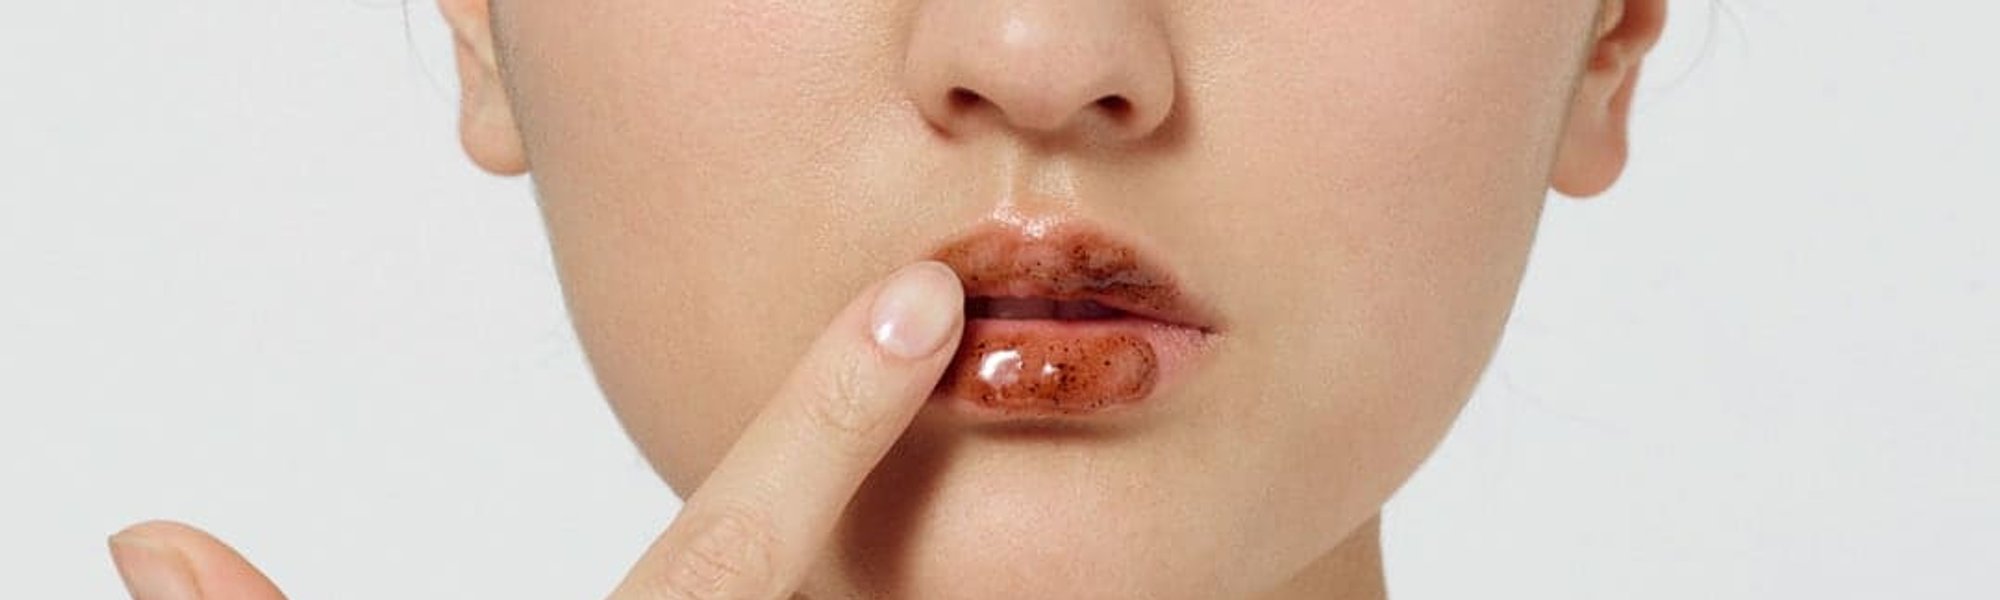 How To Use Lip Scrub To Perfect Your Lips 1080x476